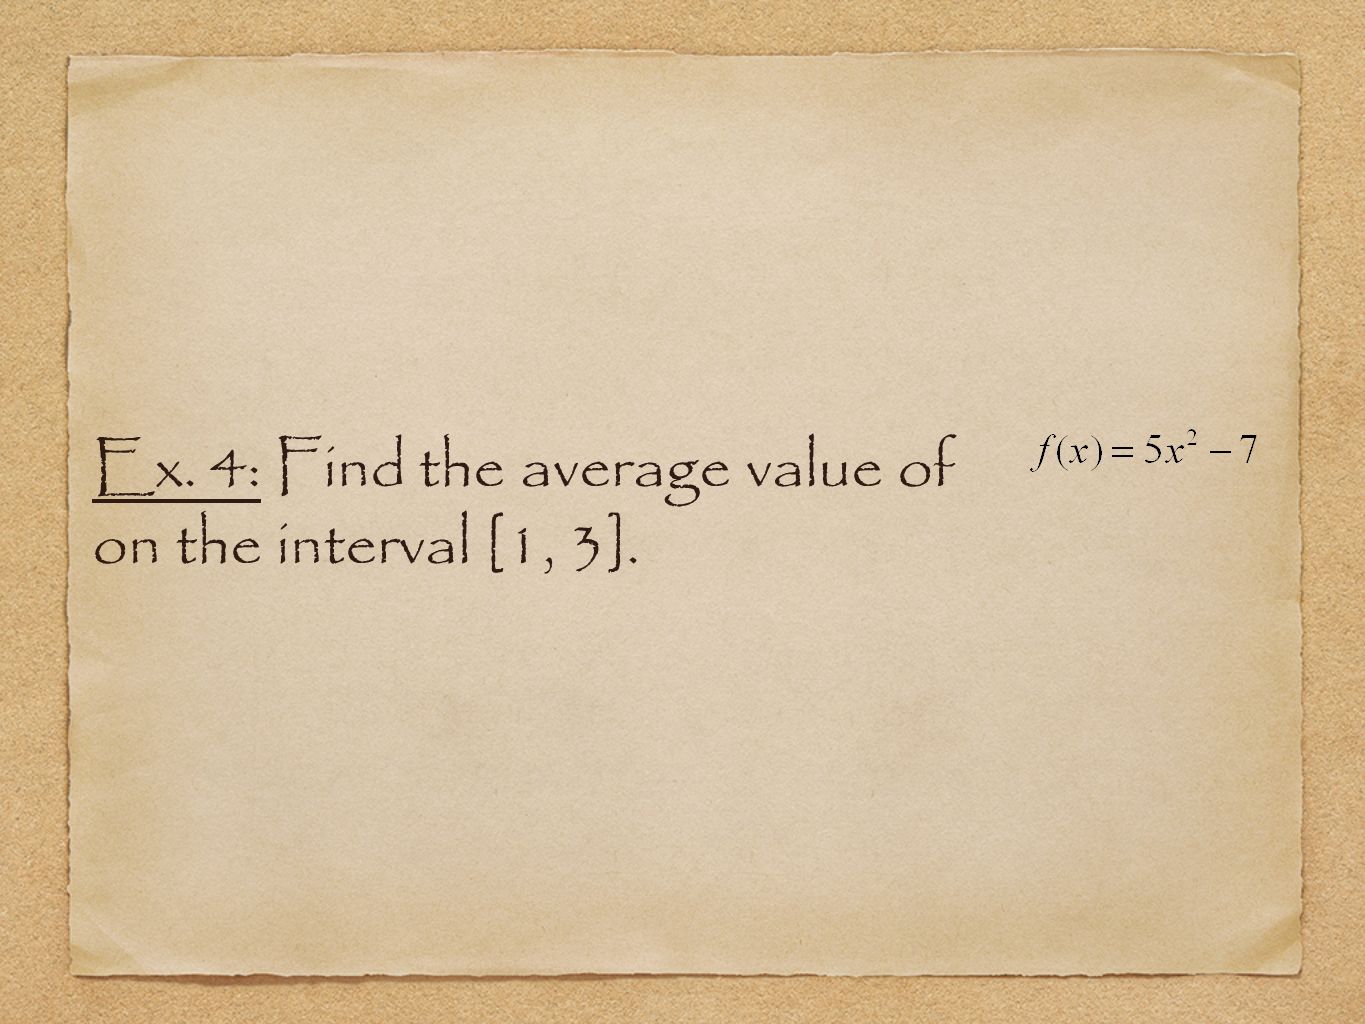 Ex. 4: Find the average value of on the interval [1, 3].